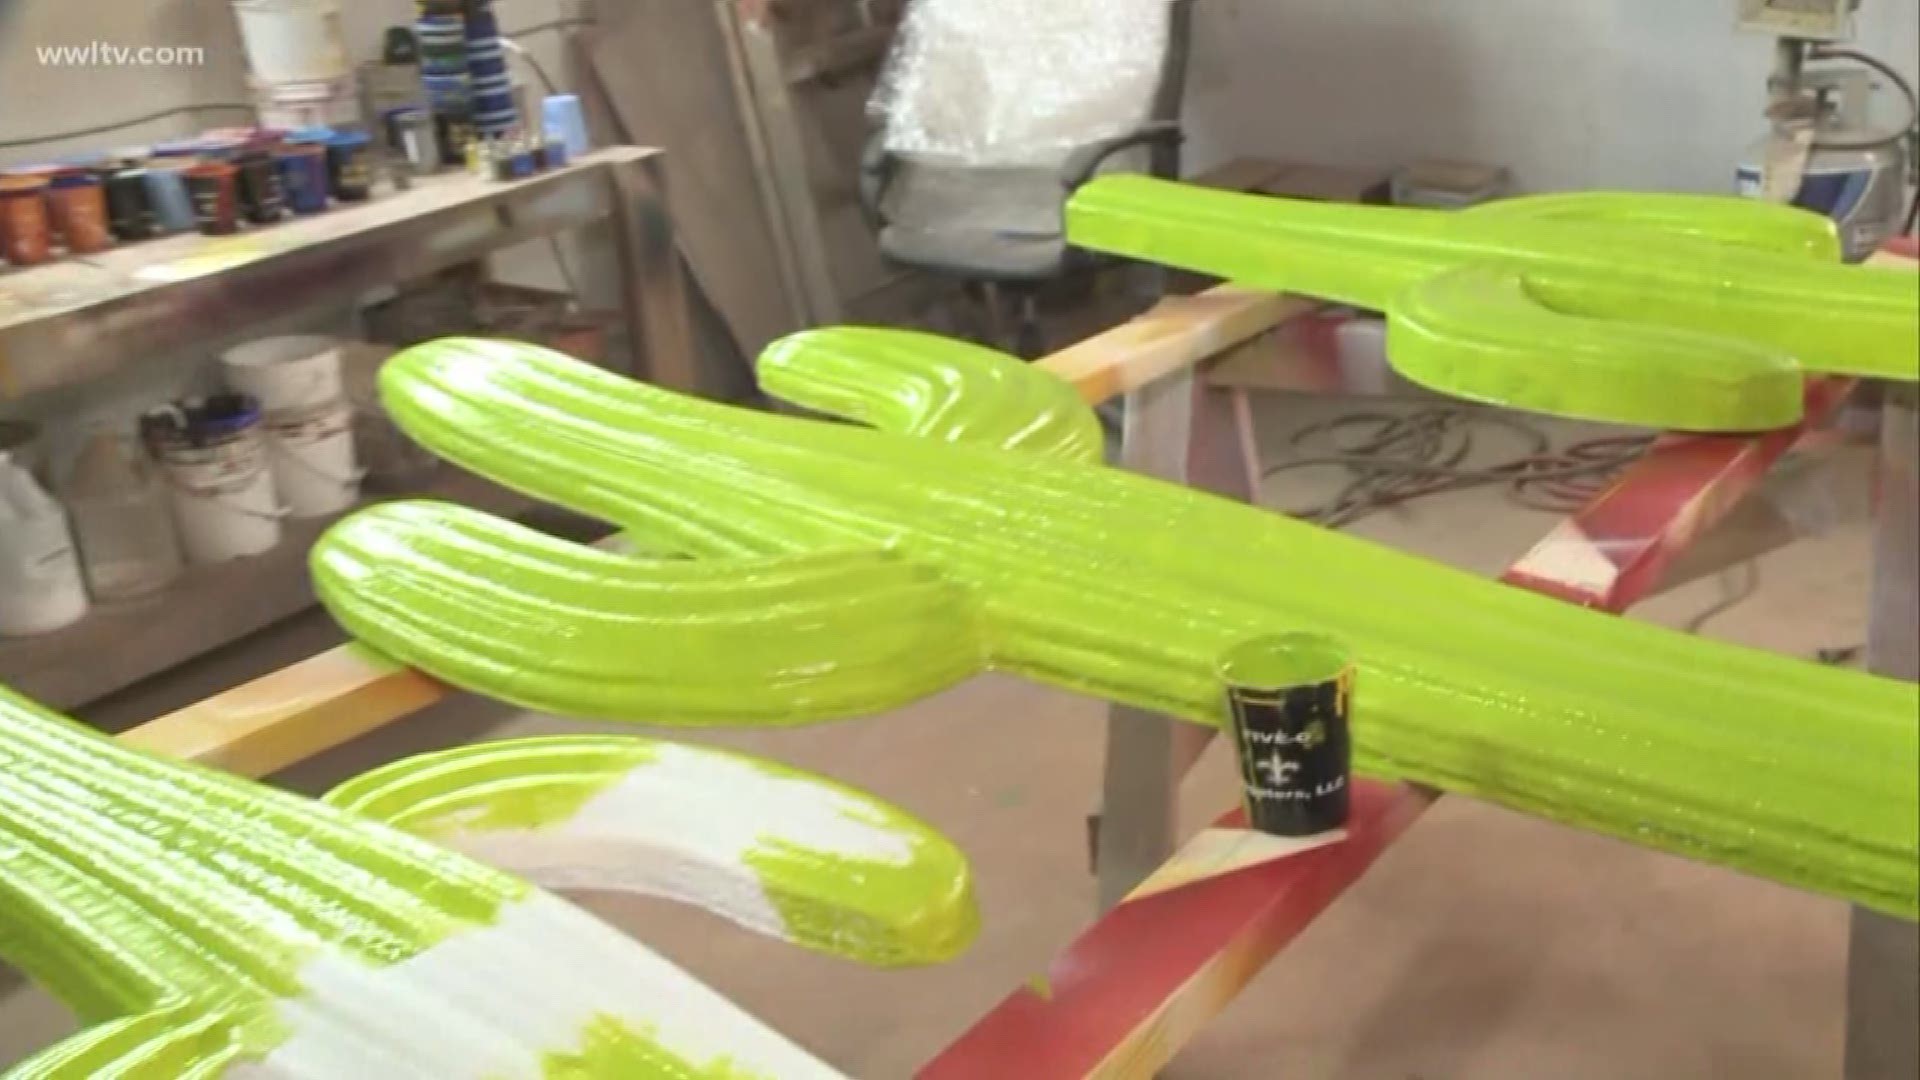 Meghan Kee takes us to Mardi Gras World to get a sneak peek of the floats being built for this years Carnival season.